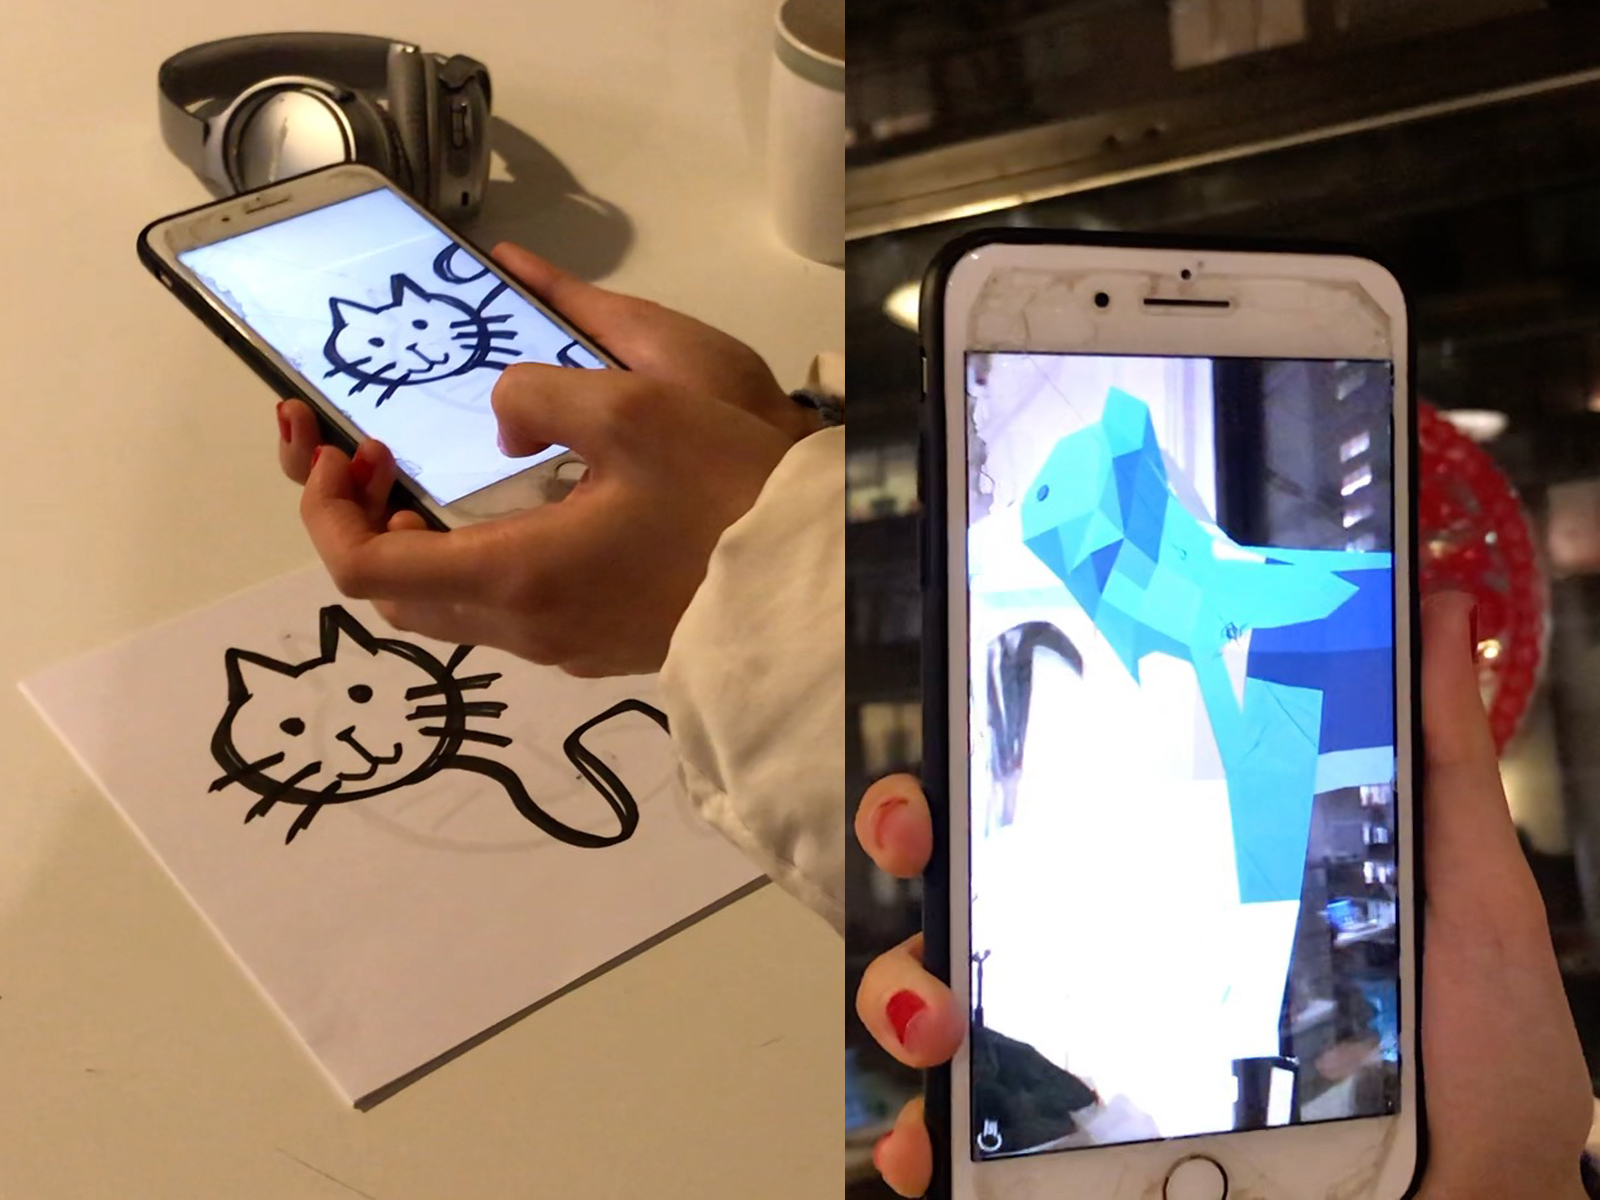 Sketch To AR is a tool for turning a 2D drawing in the real world into a 3D virtual object in AR.